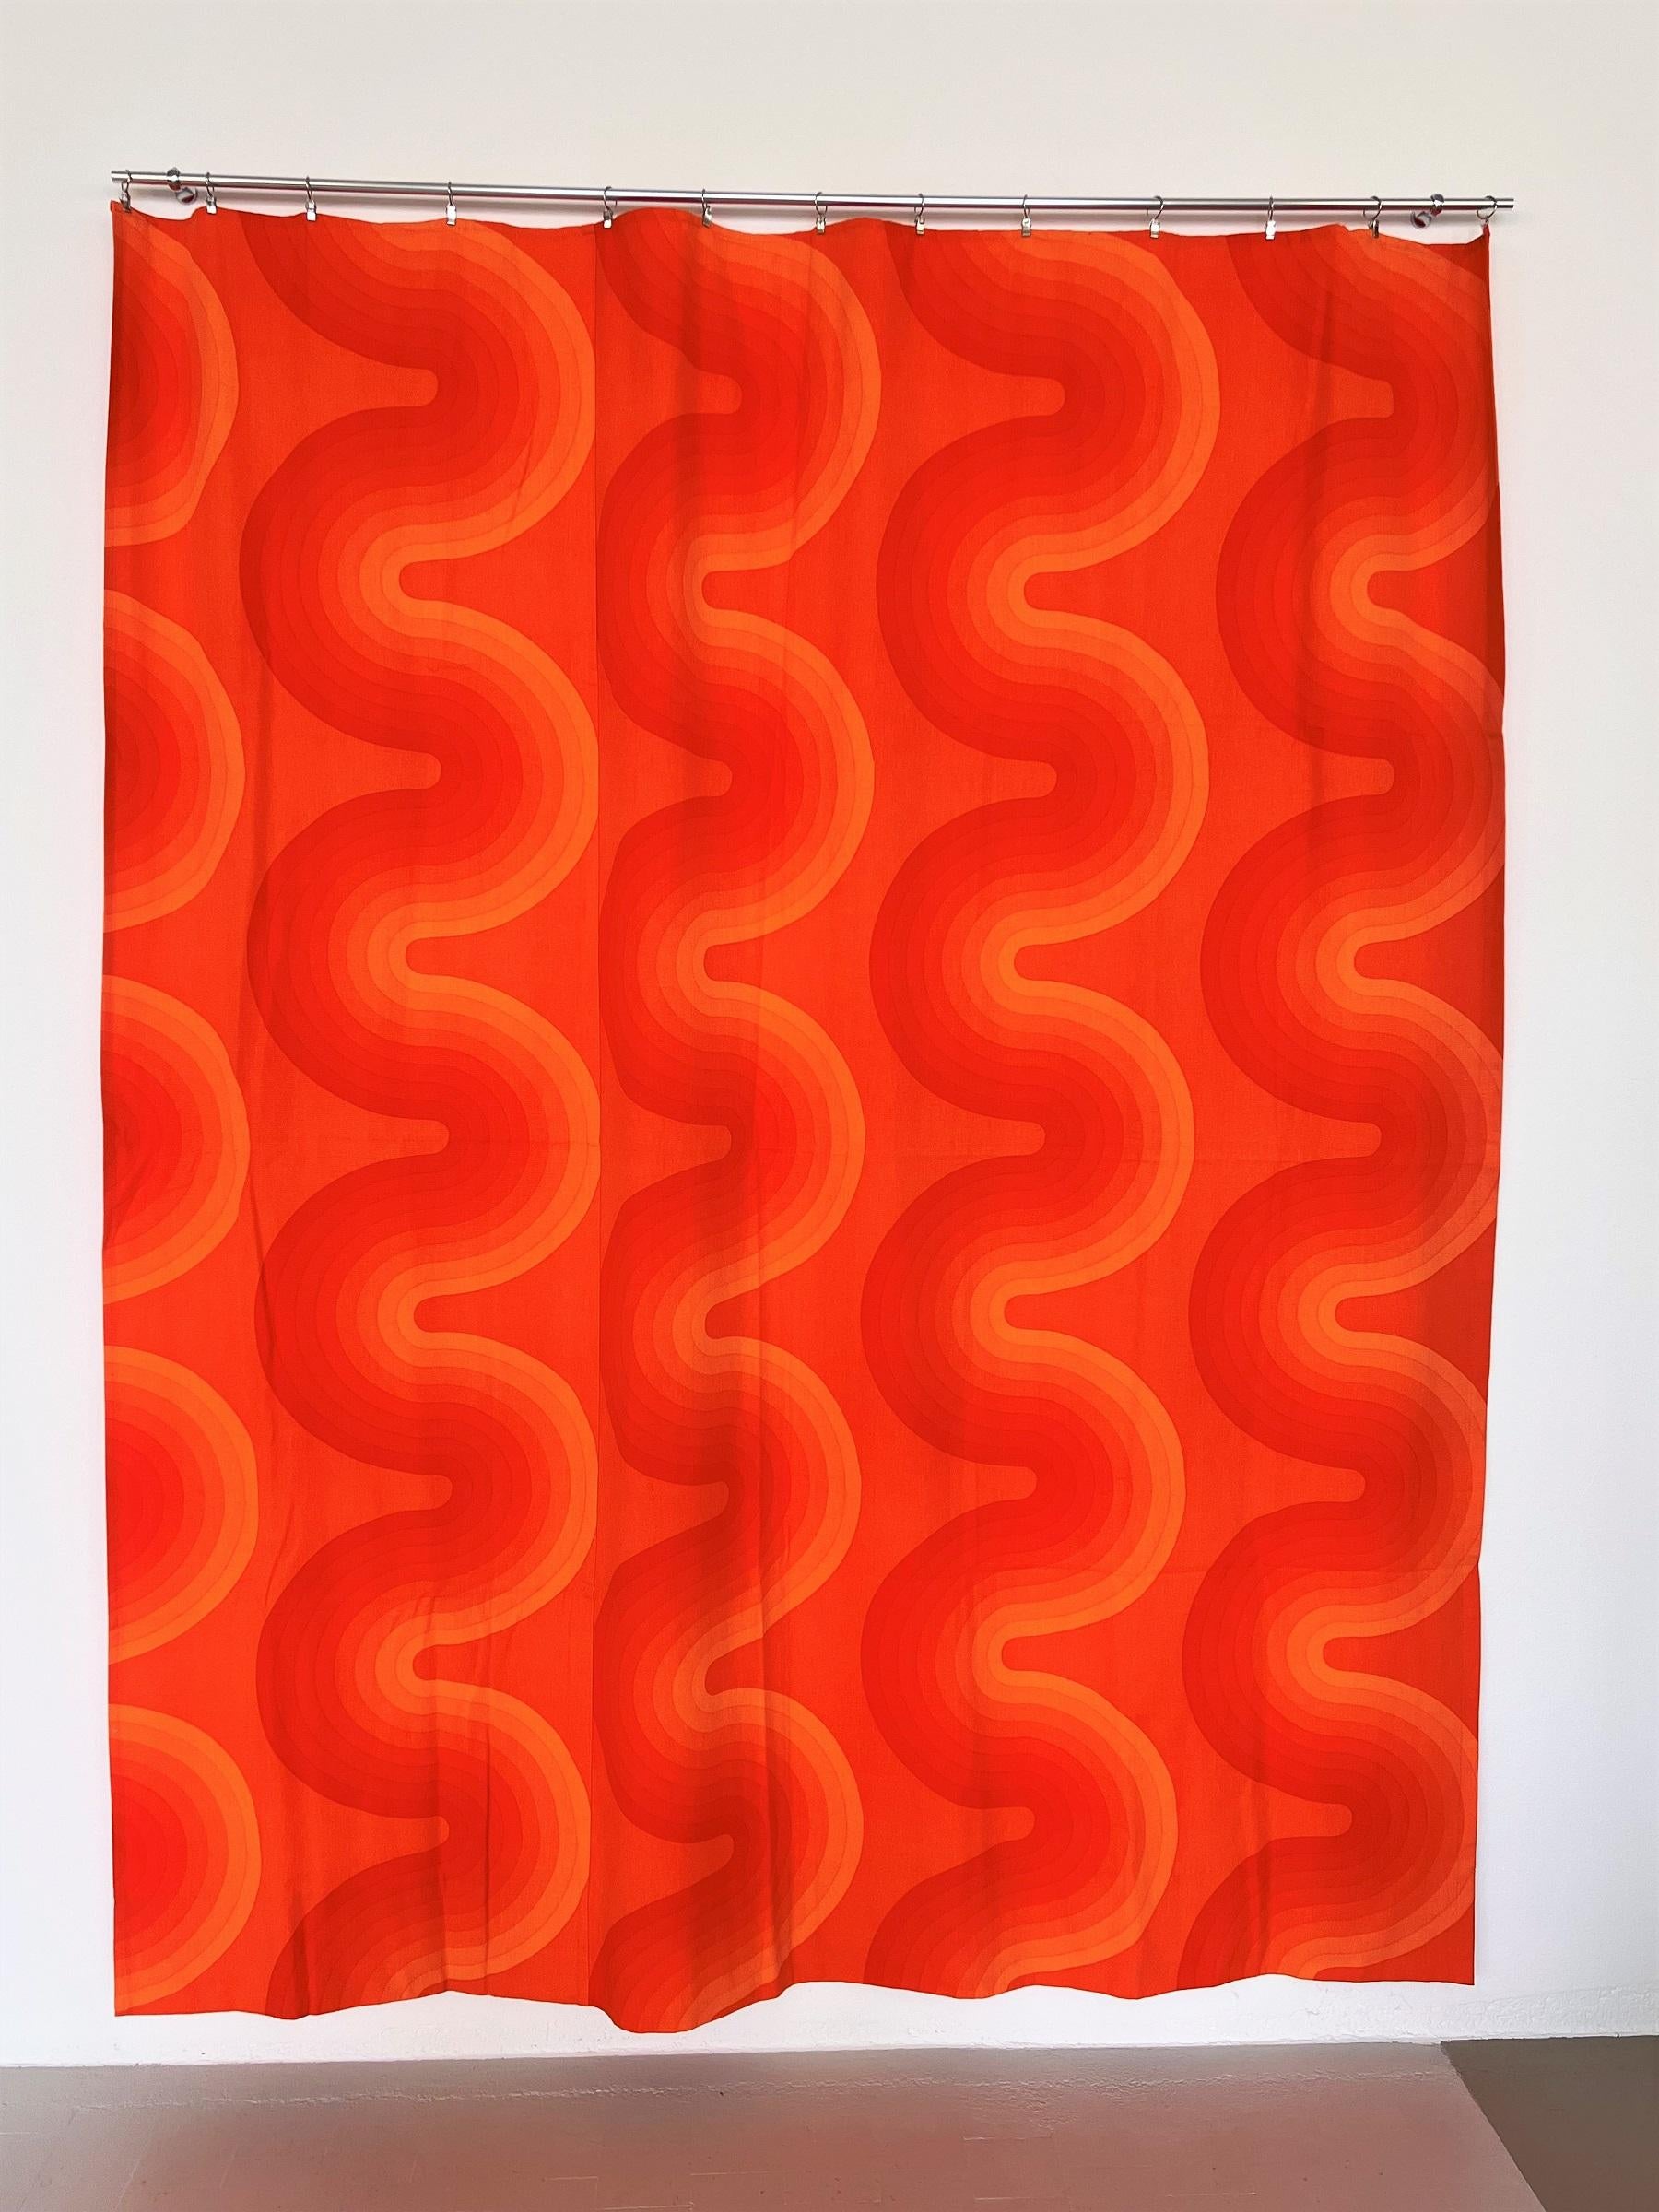 Powerful original fabric panel designed by Verner Panton during 1969-1971.
100% cotton material, Art. VP-ON-22. Mira-X Collection Decor I., Made in Switzerland. 
The fabric panel is 79